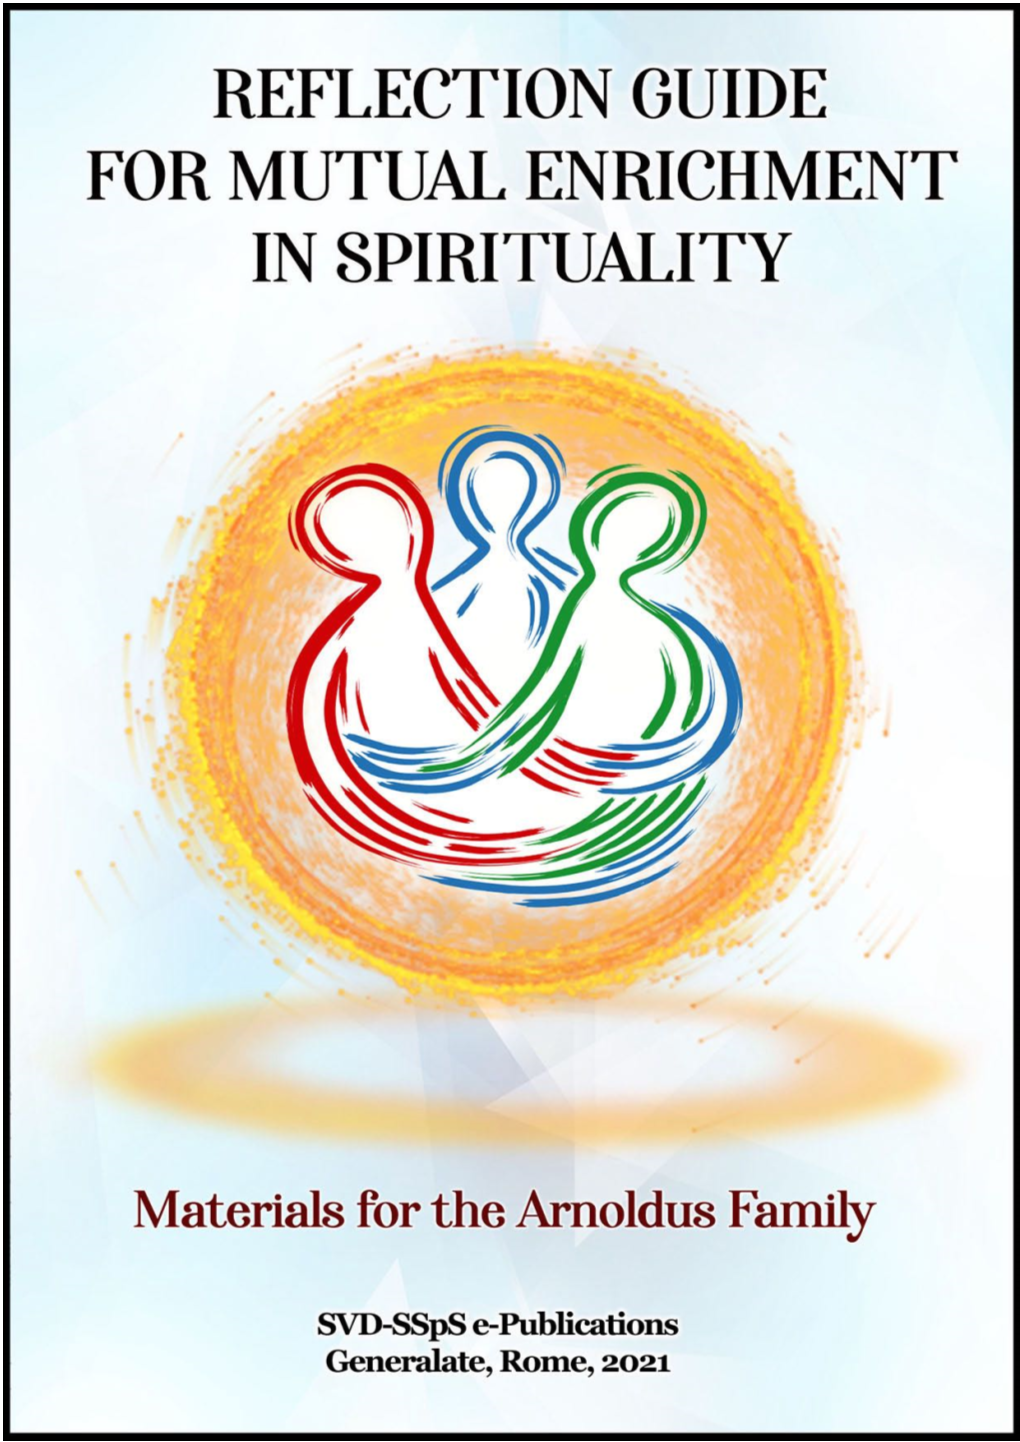 Reflection Guide for Mutual Enrichment in Spirituality